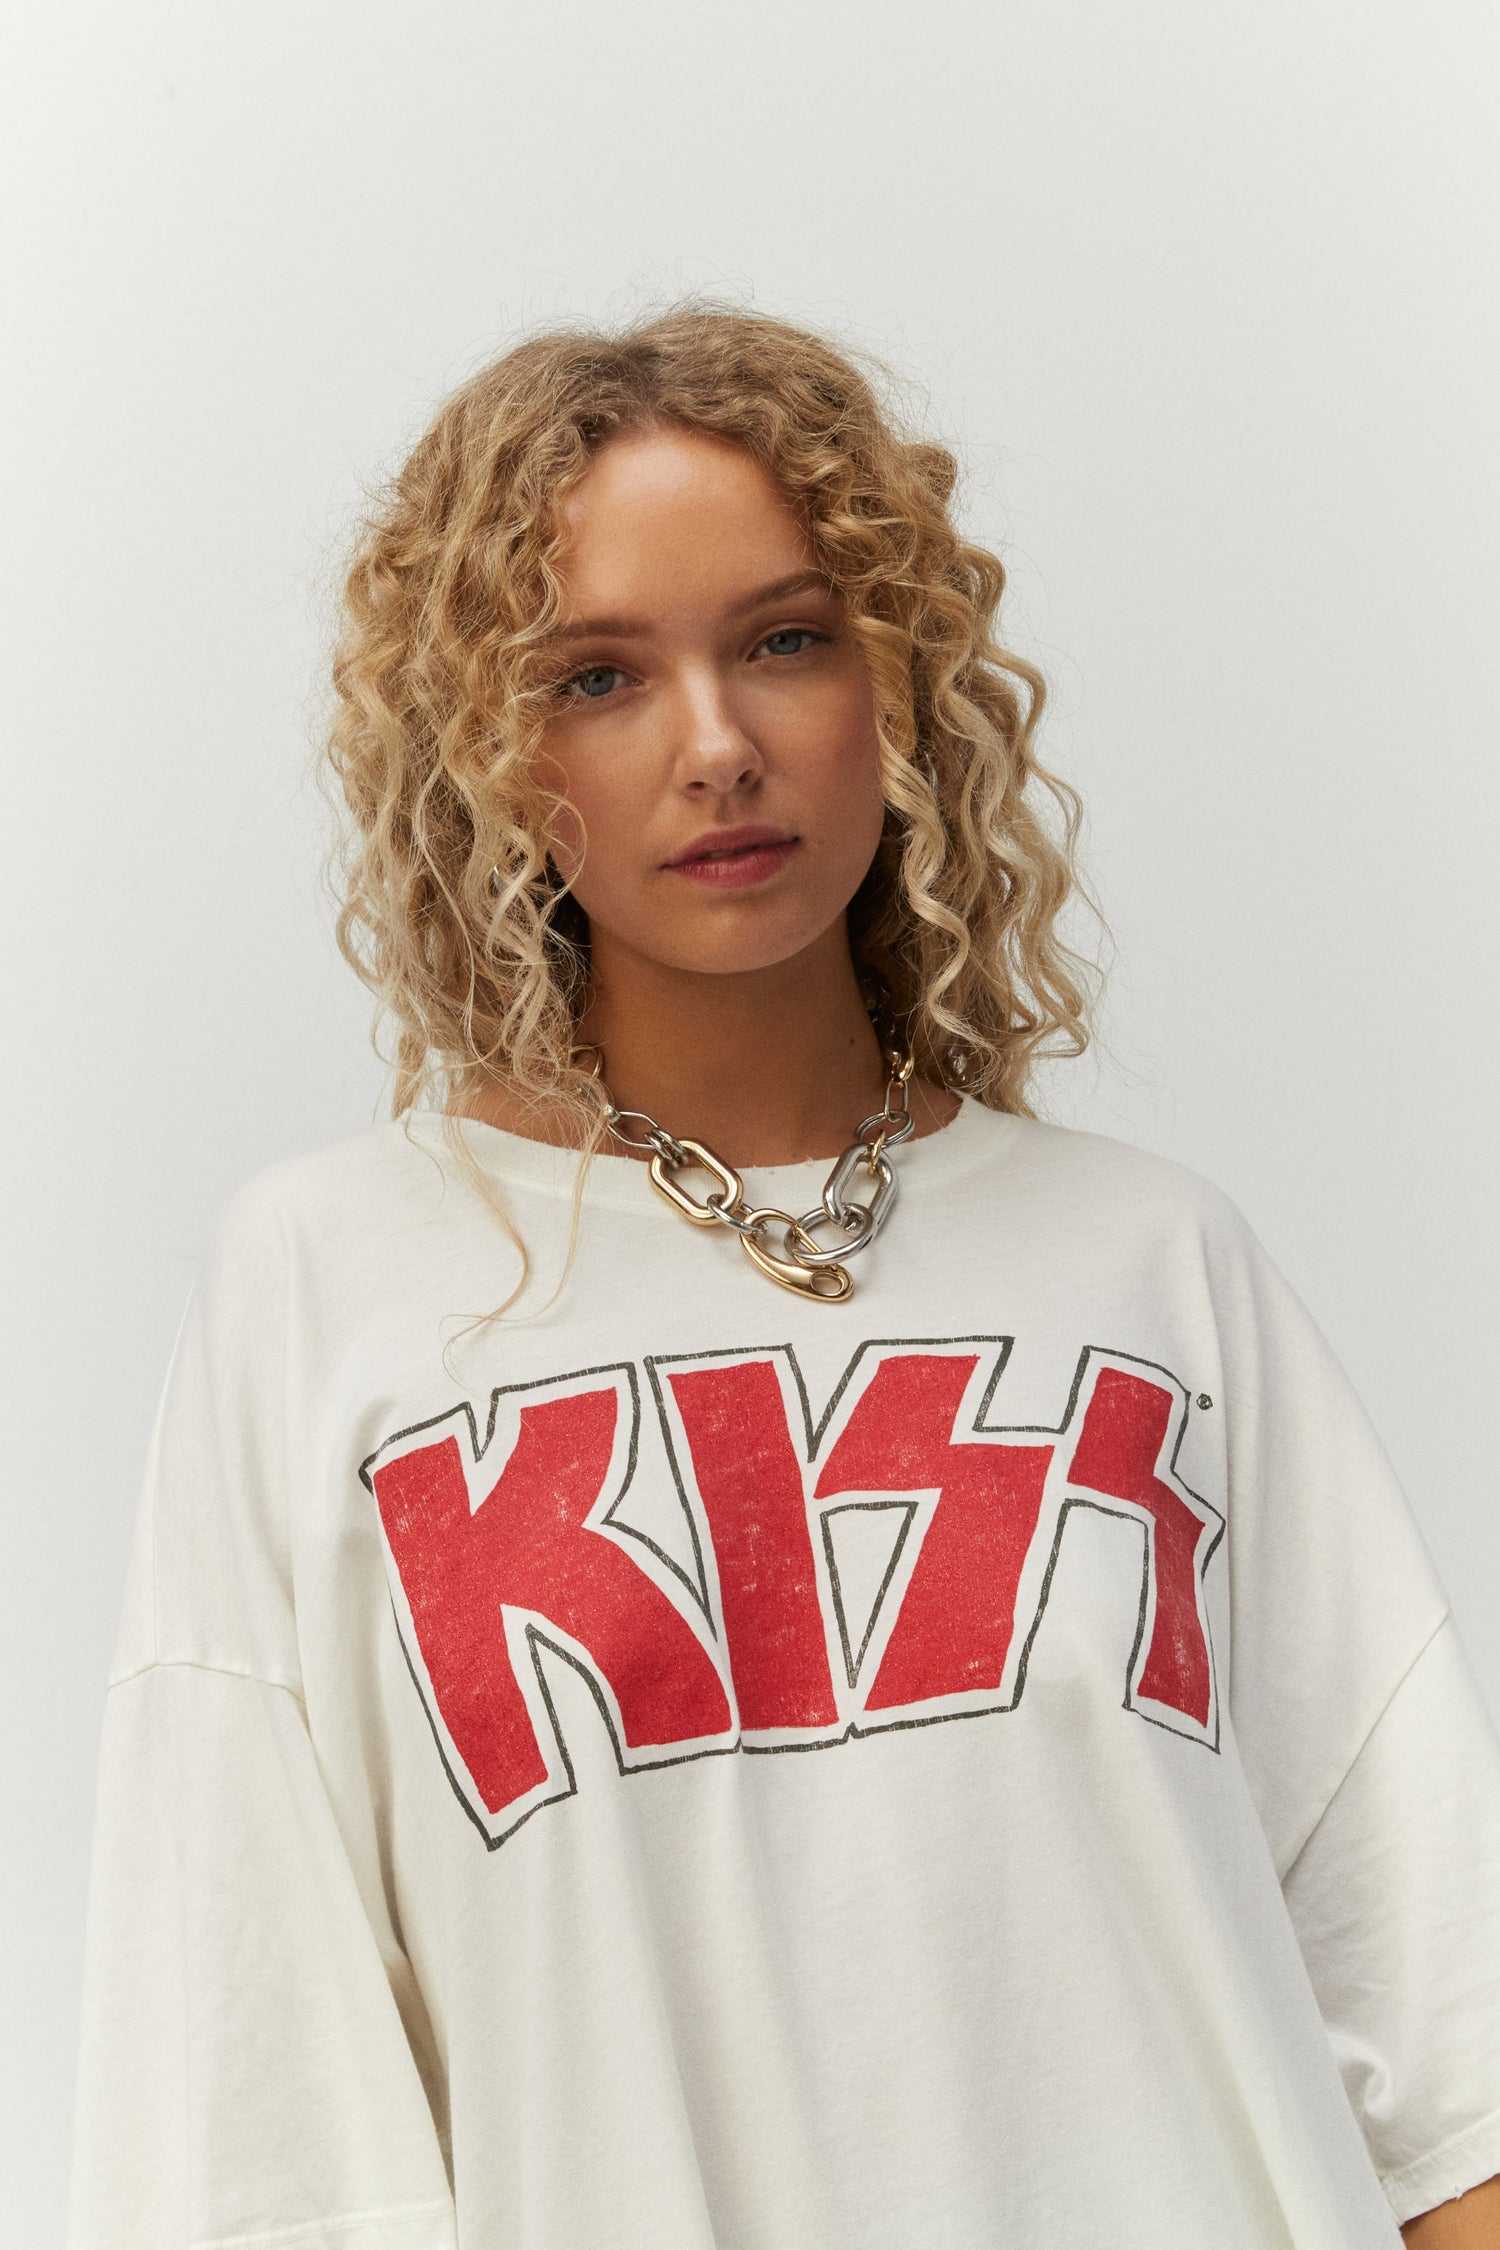 Blonde curly-haired model featuring a white tee designed with Kiss’ logo in iconic red glitter